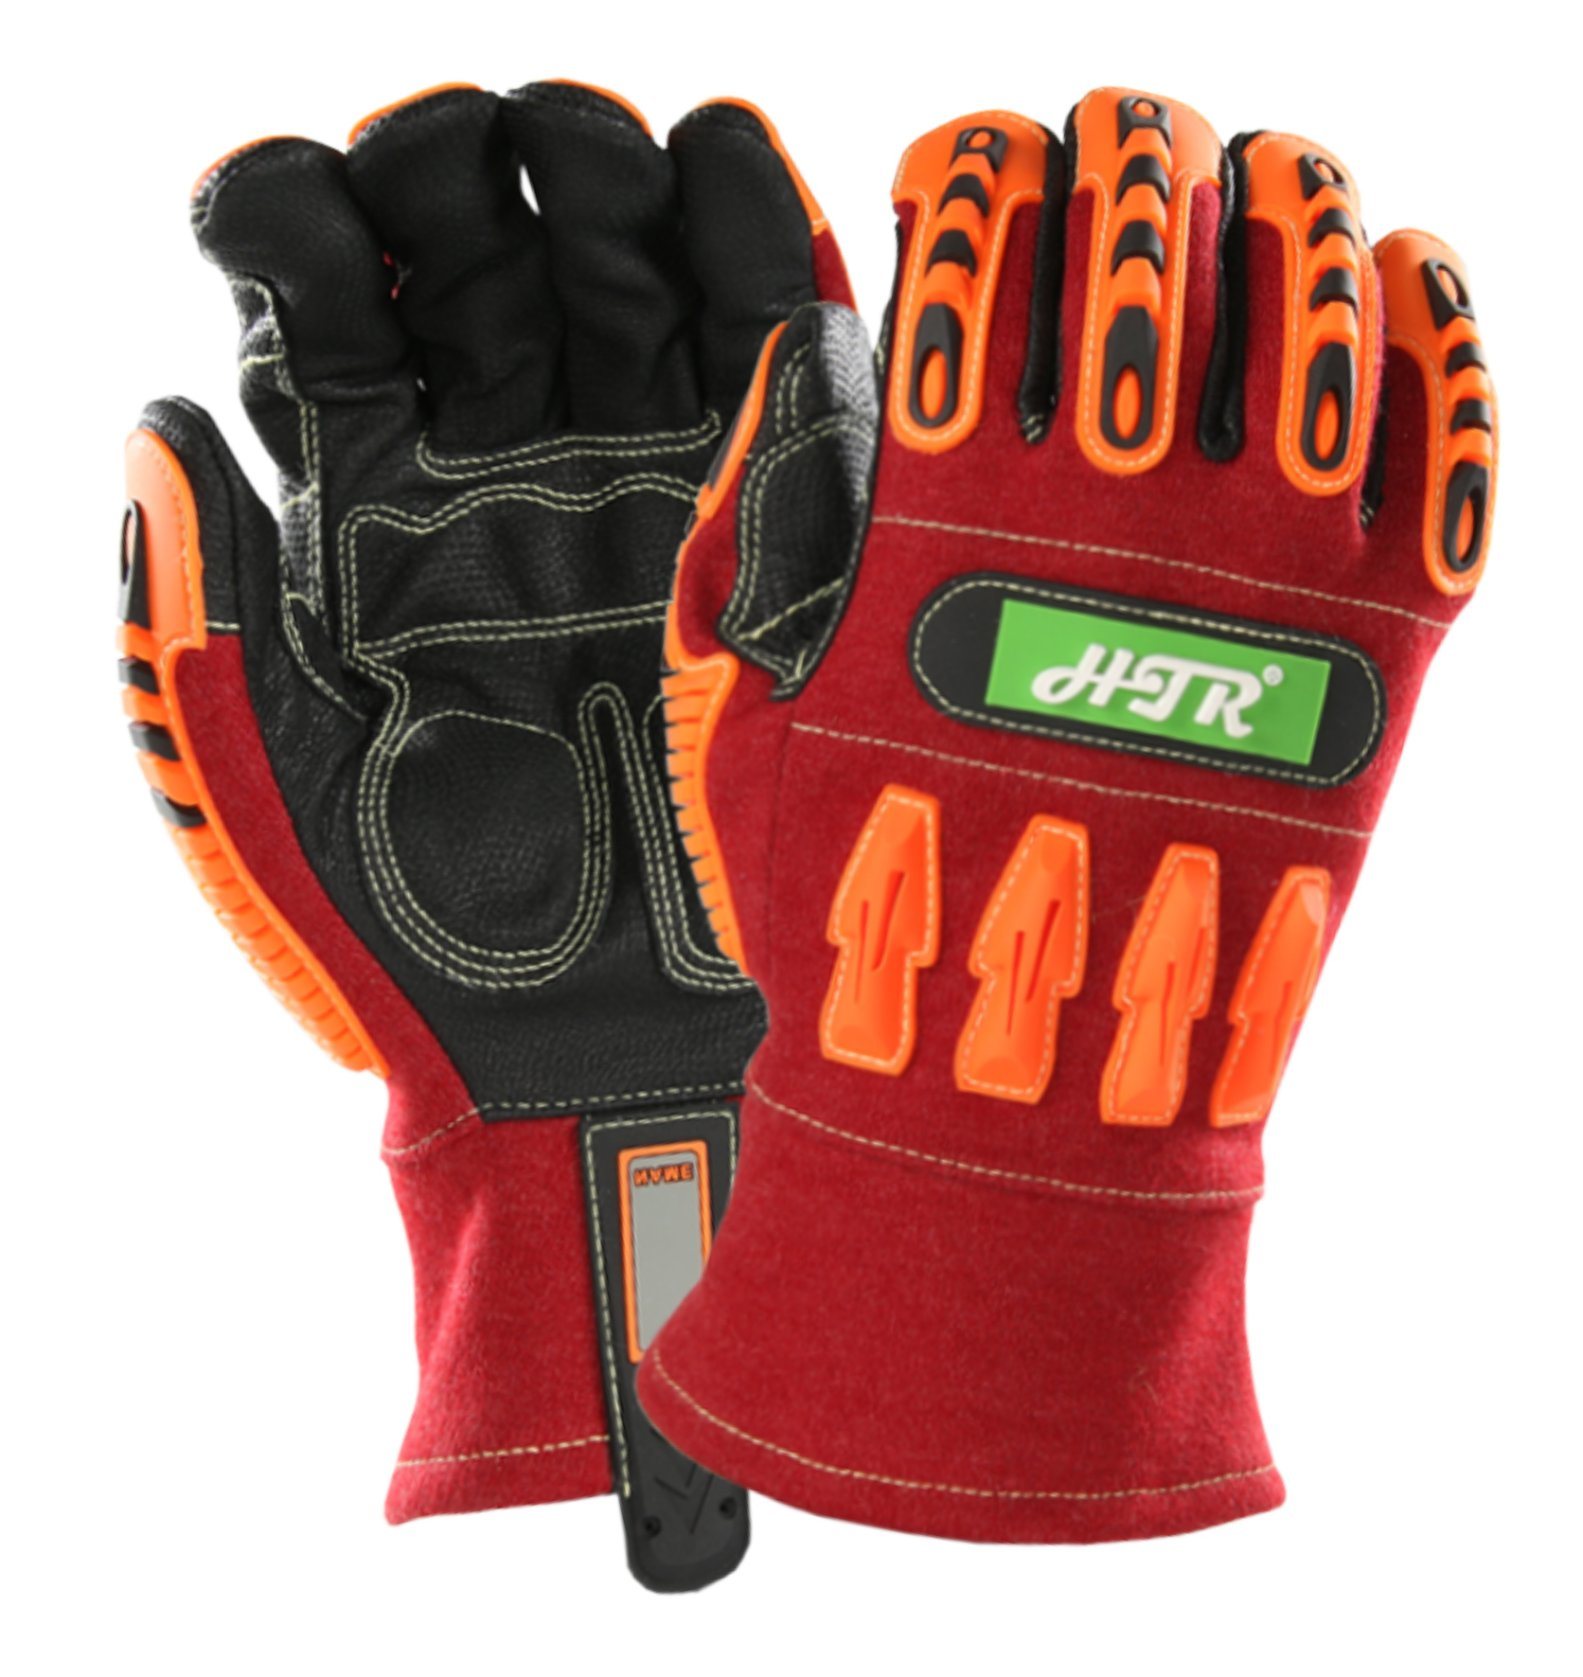 Flame-Resistant Anti-Impact Industrial Work Glove for Electric-Arc Welding